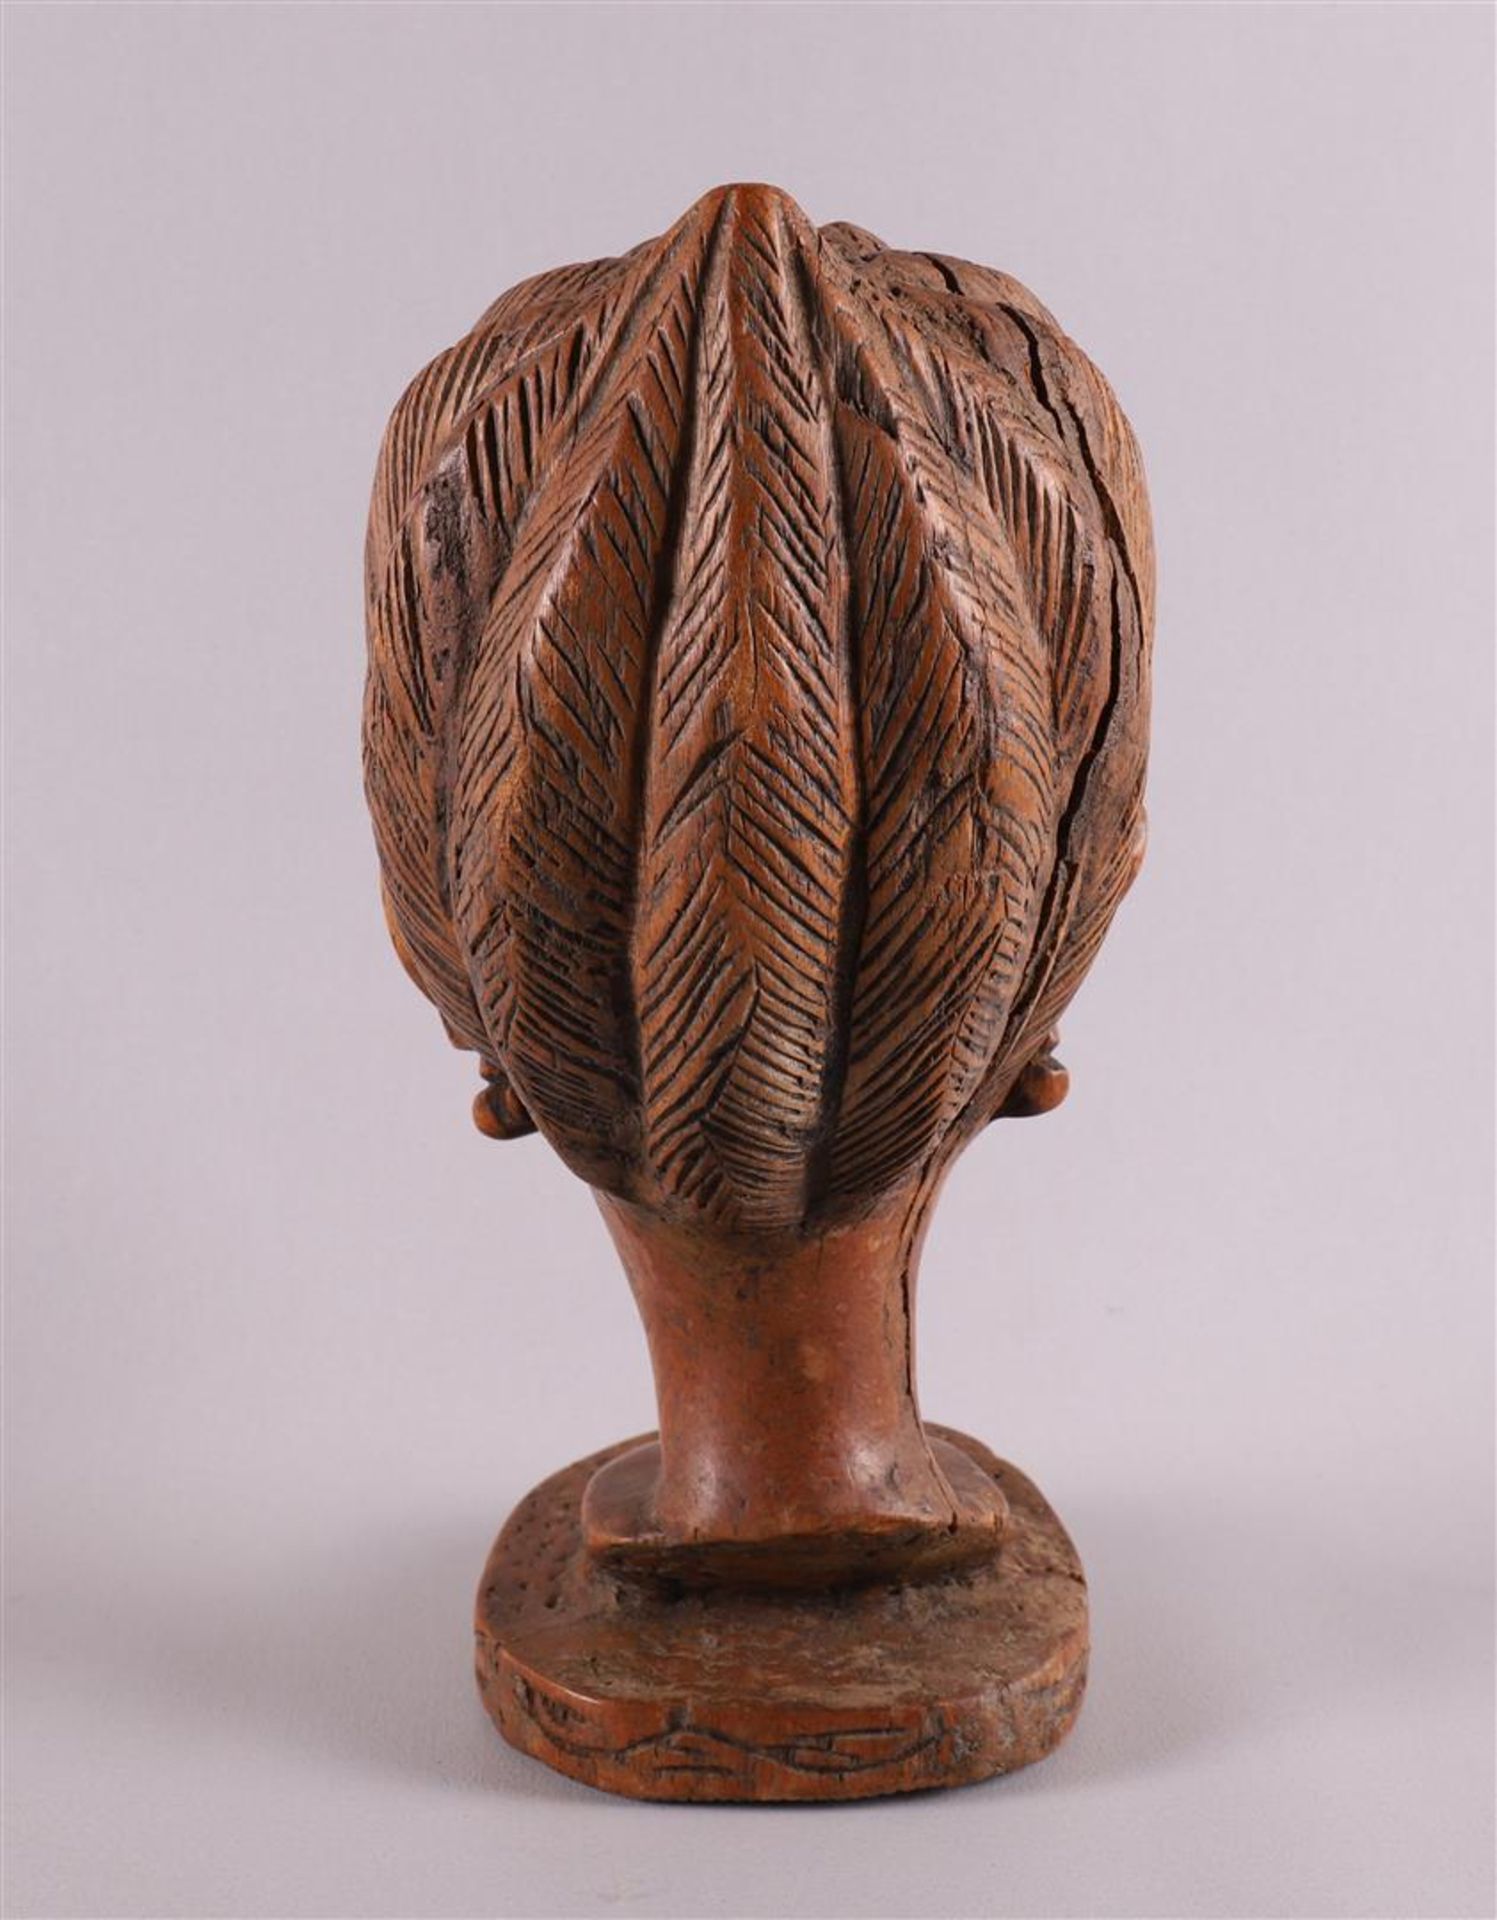 Ethnography. A tropical wooden bust of a woman, Africa, Ivory Coast or surroundings, 20th century, h - Image 4 of 4